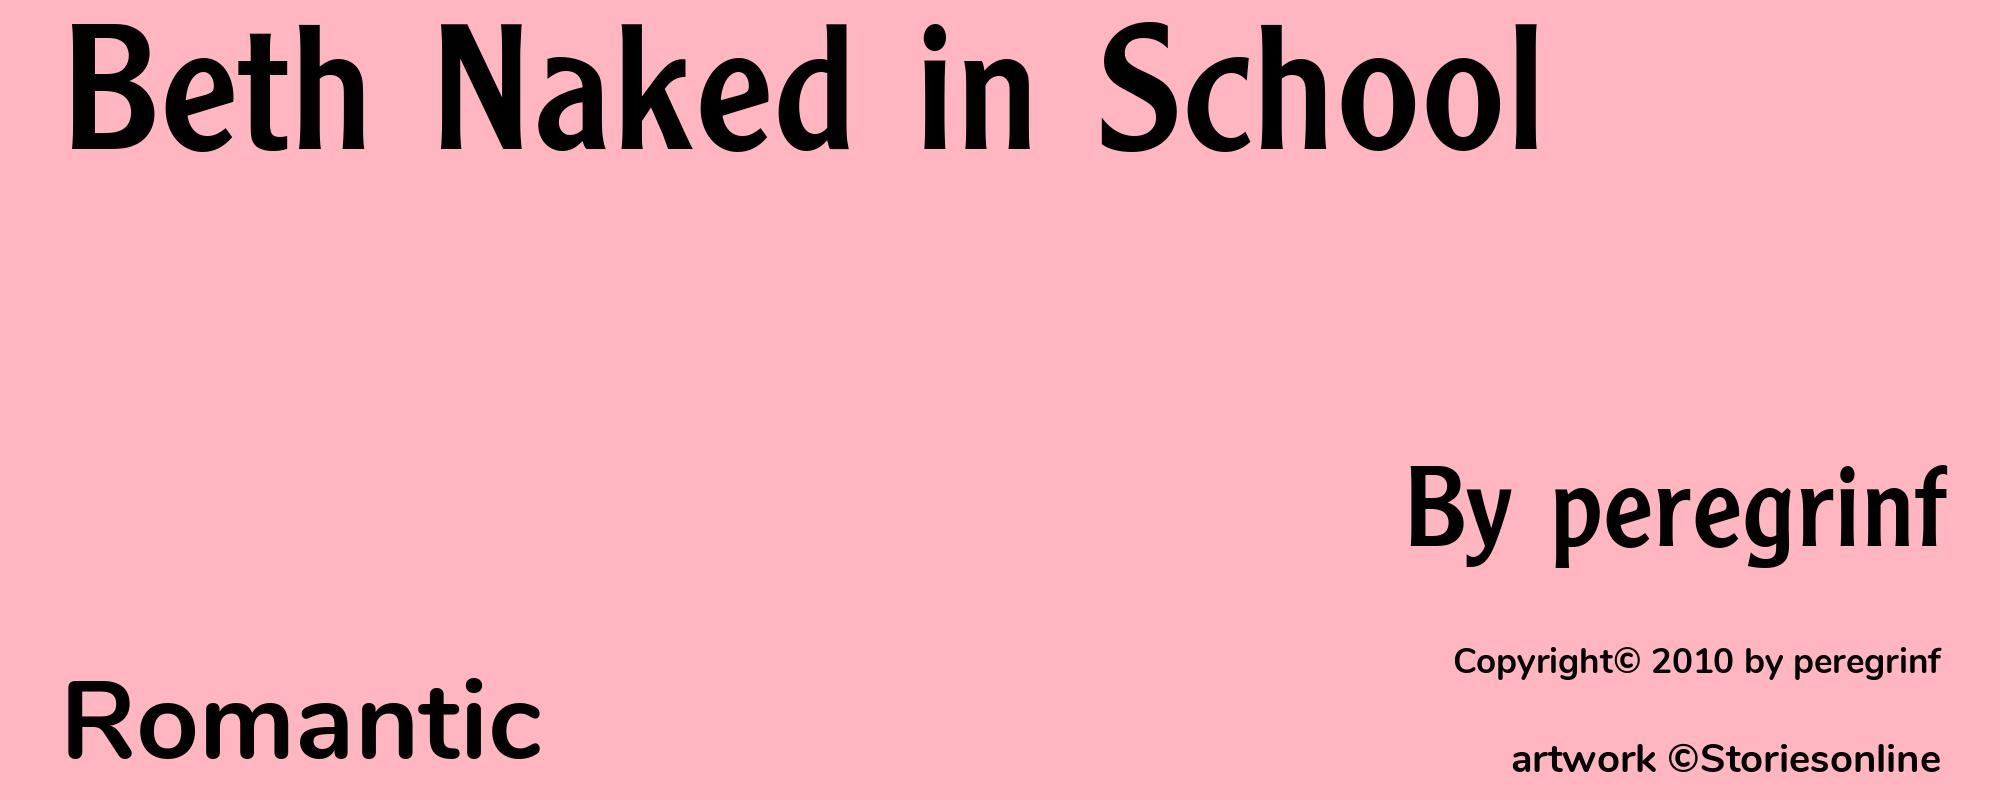 Beth Naked in School - Cover